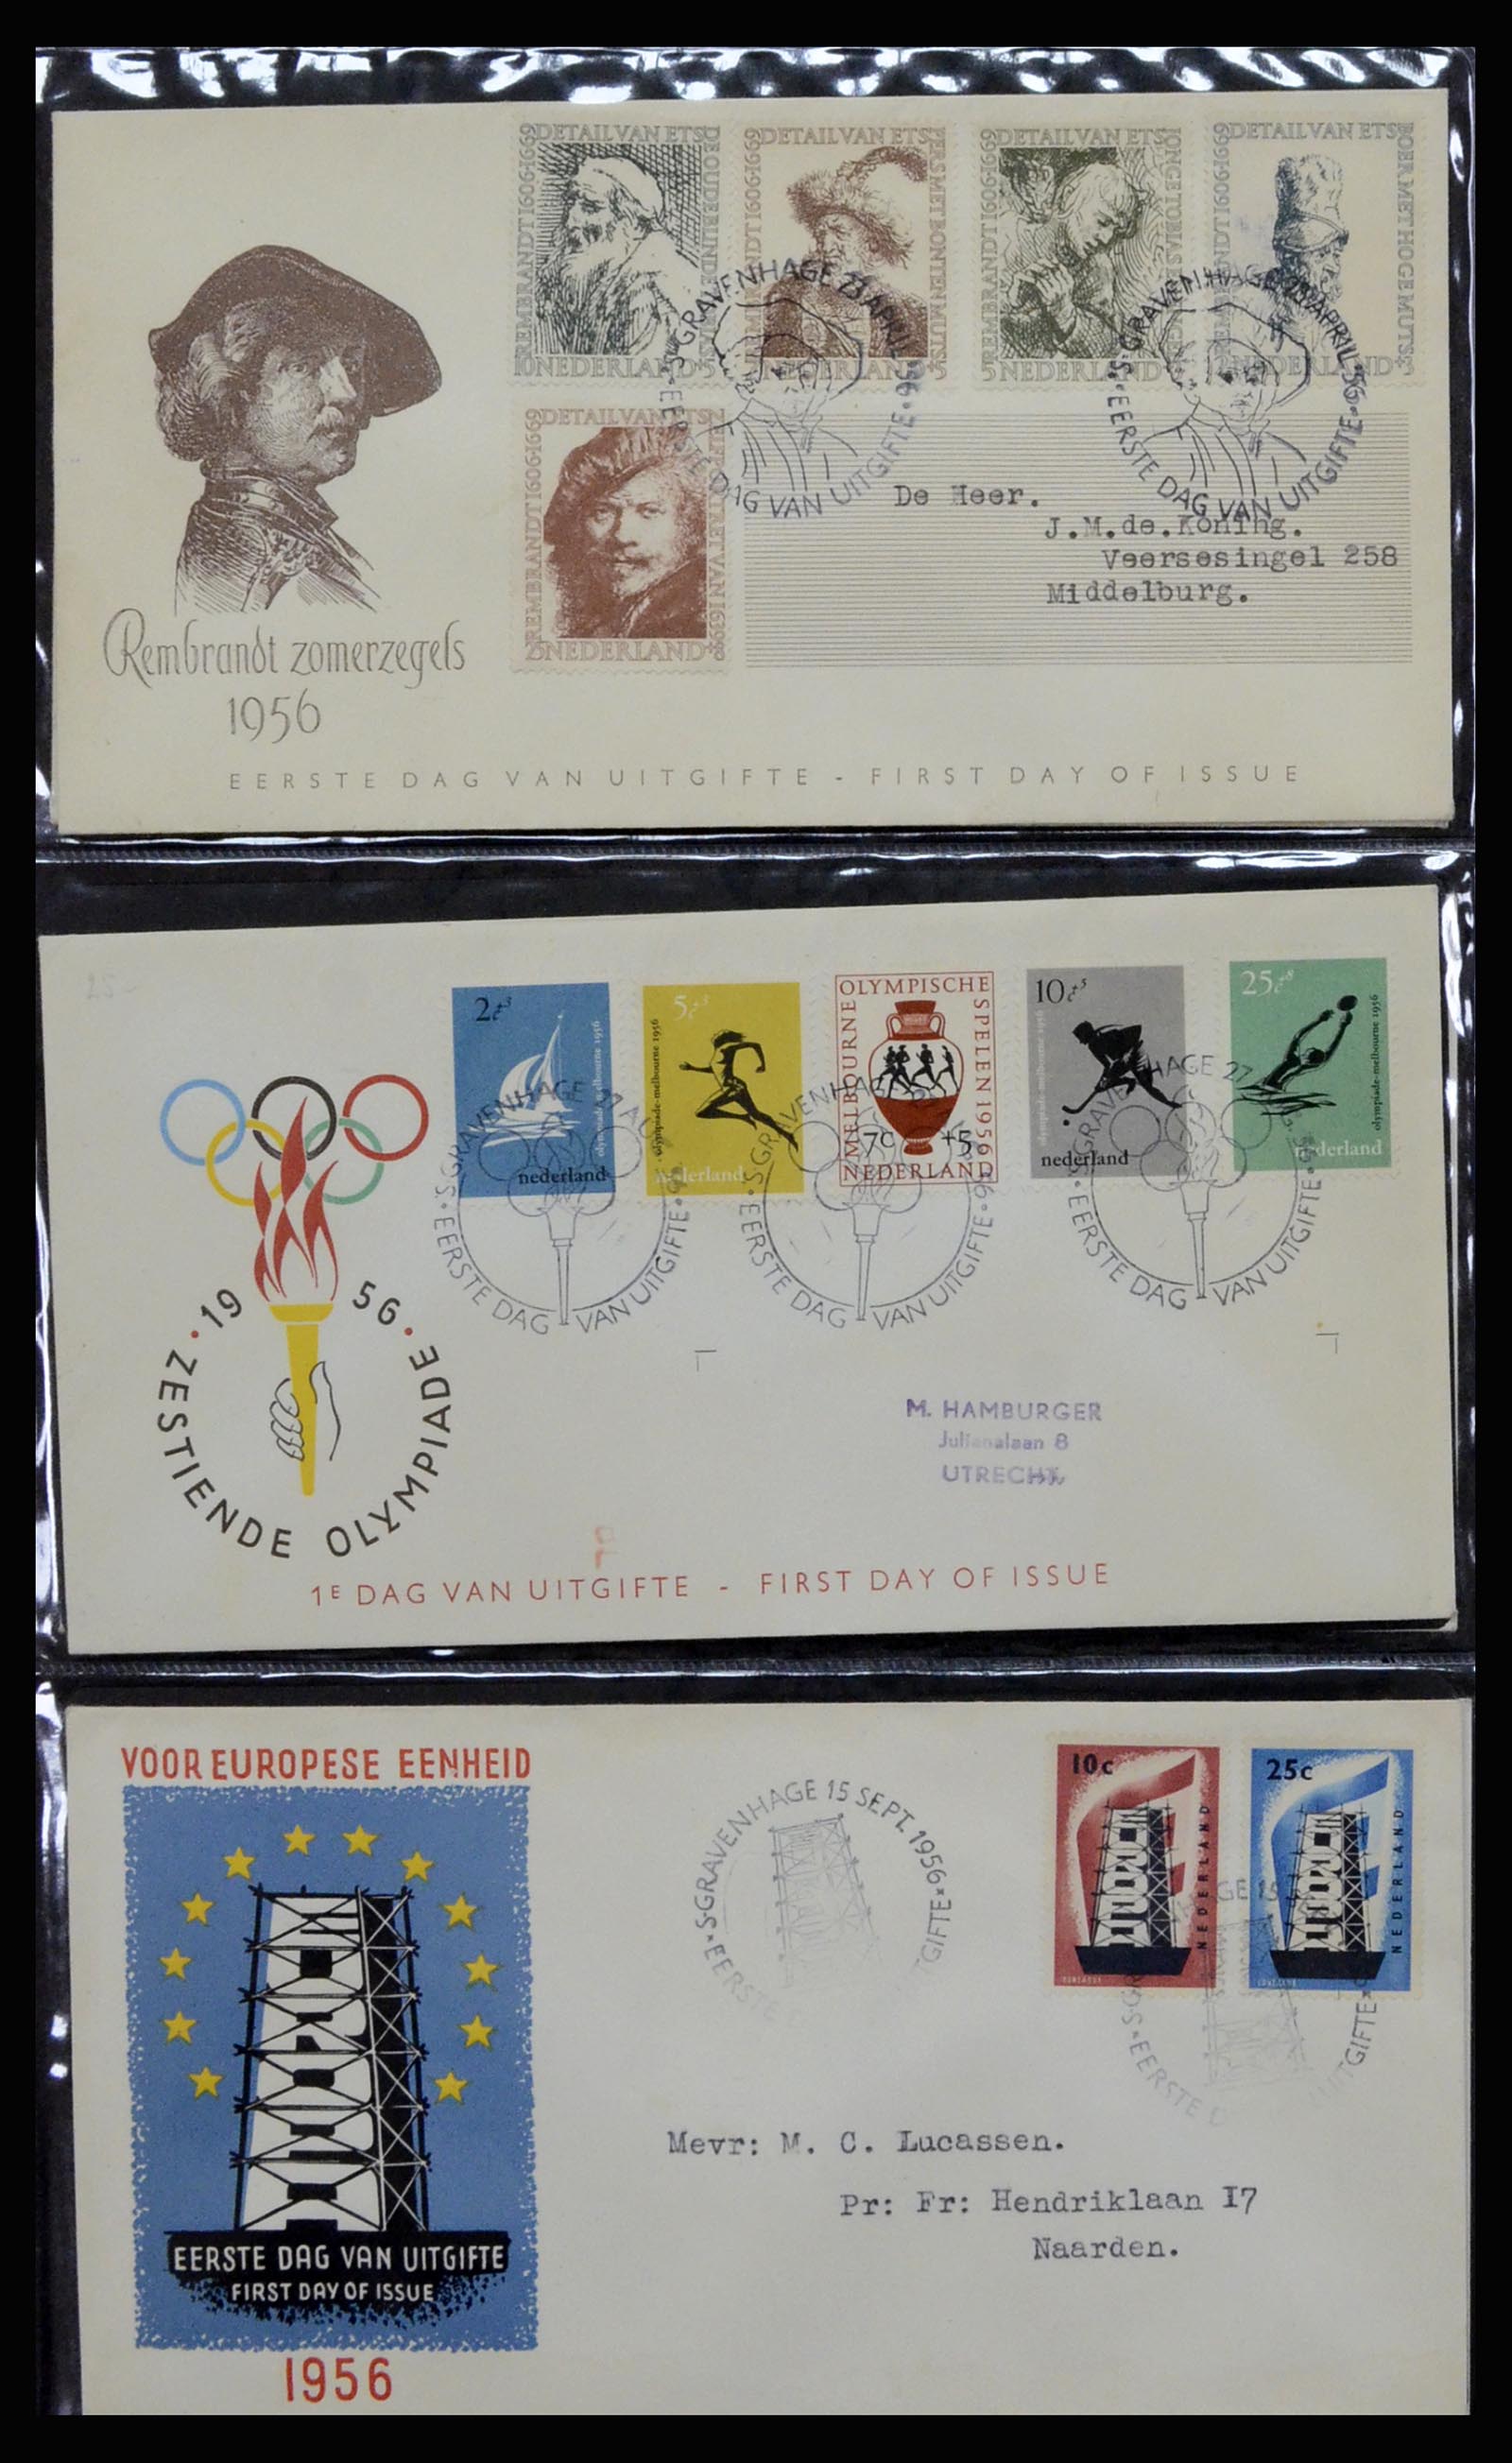 37197 010 - Stamp collection 37197 Netherlands FDC's 1950-2004.